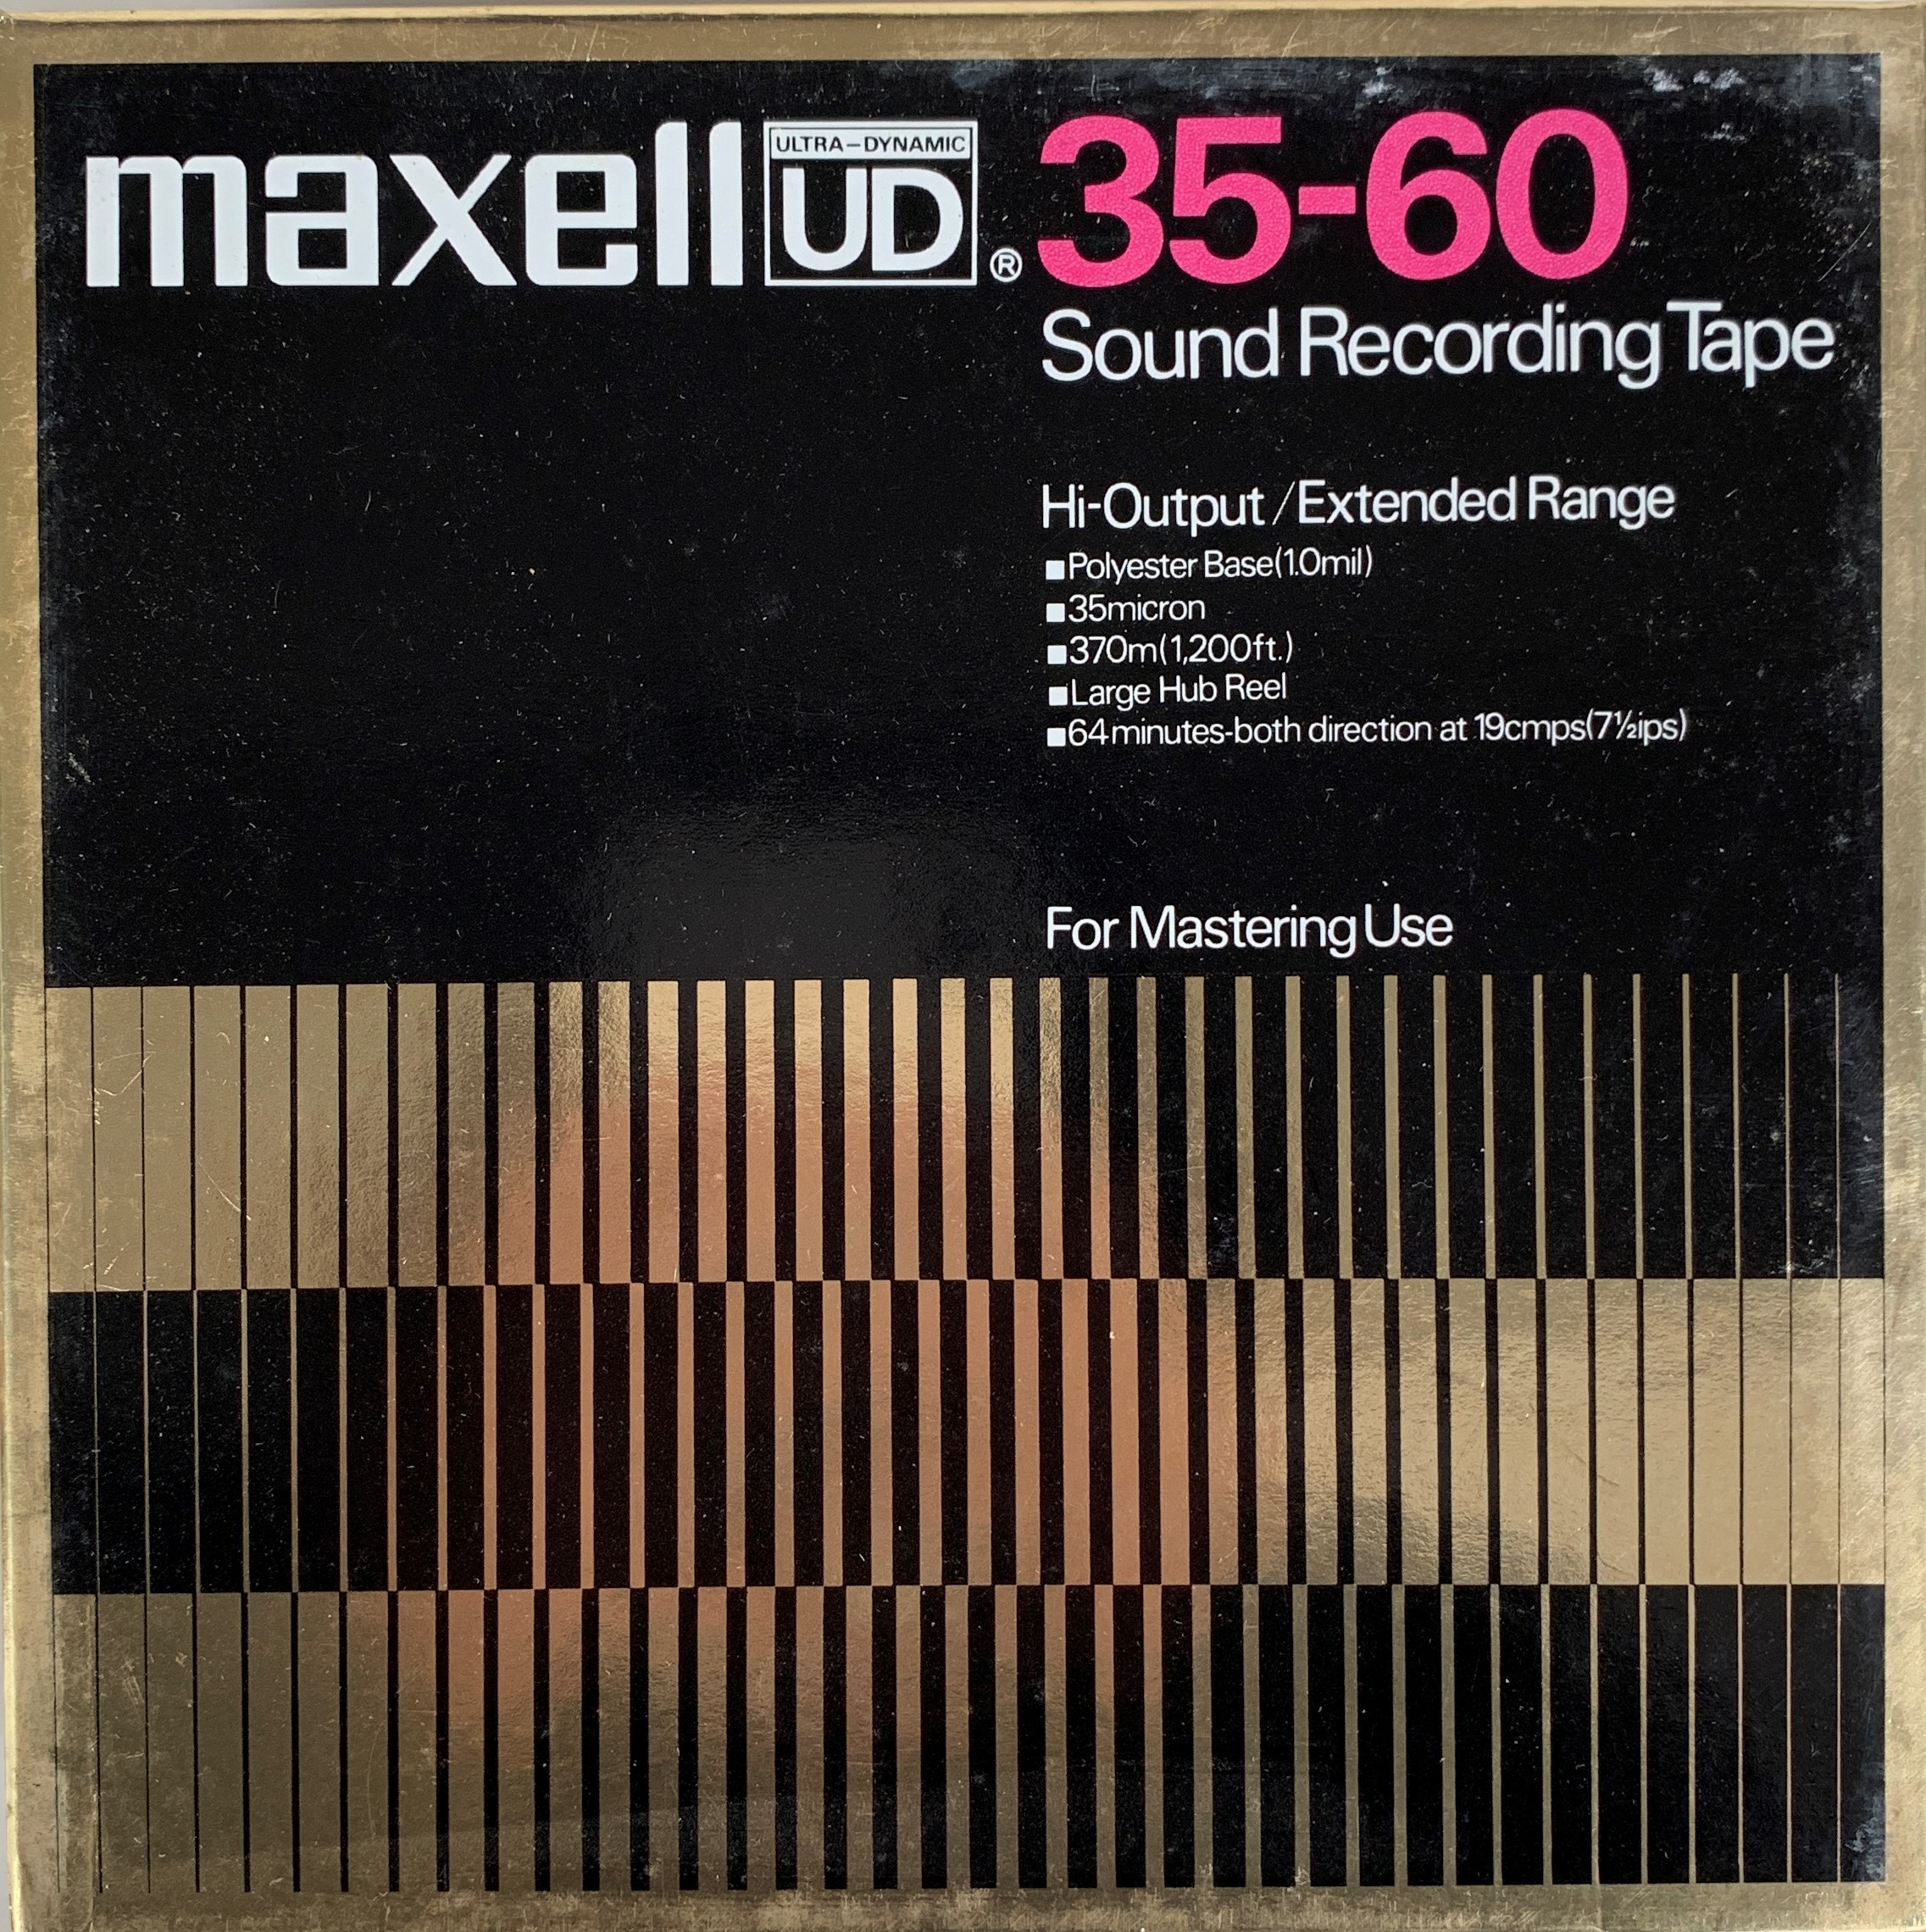 Maxell MR-7 18th empty reel metal, Empty Reels, Tape Material, Recording  Separates, Audio Devices